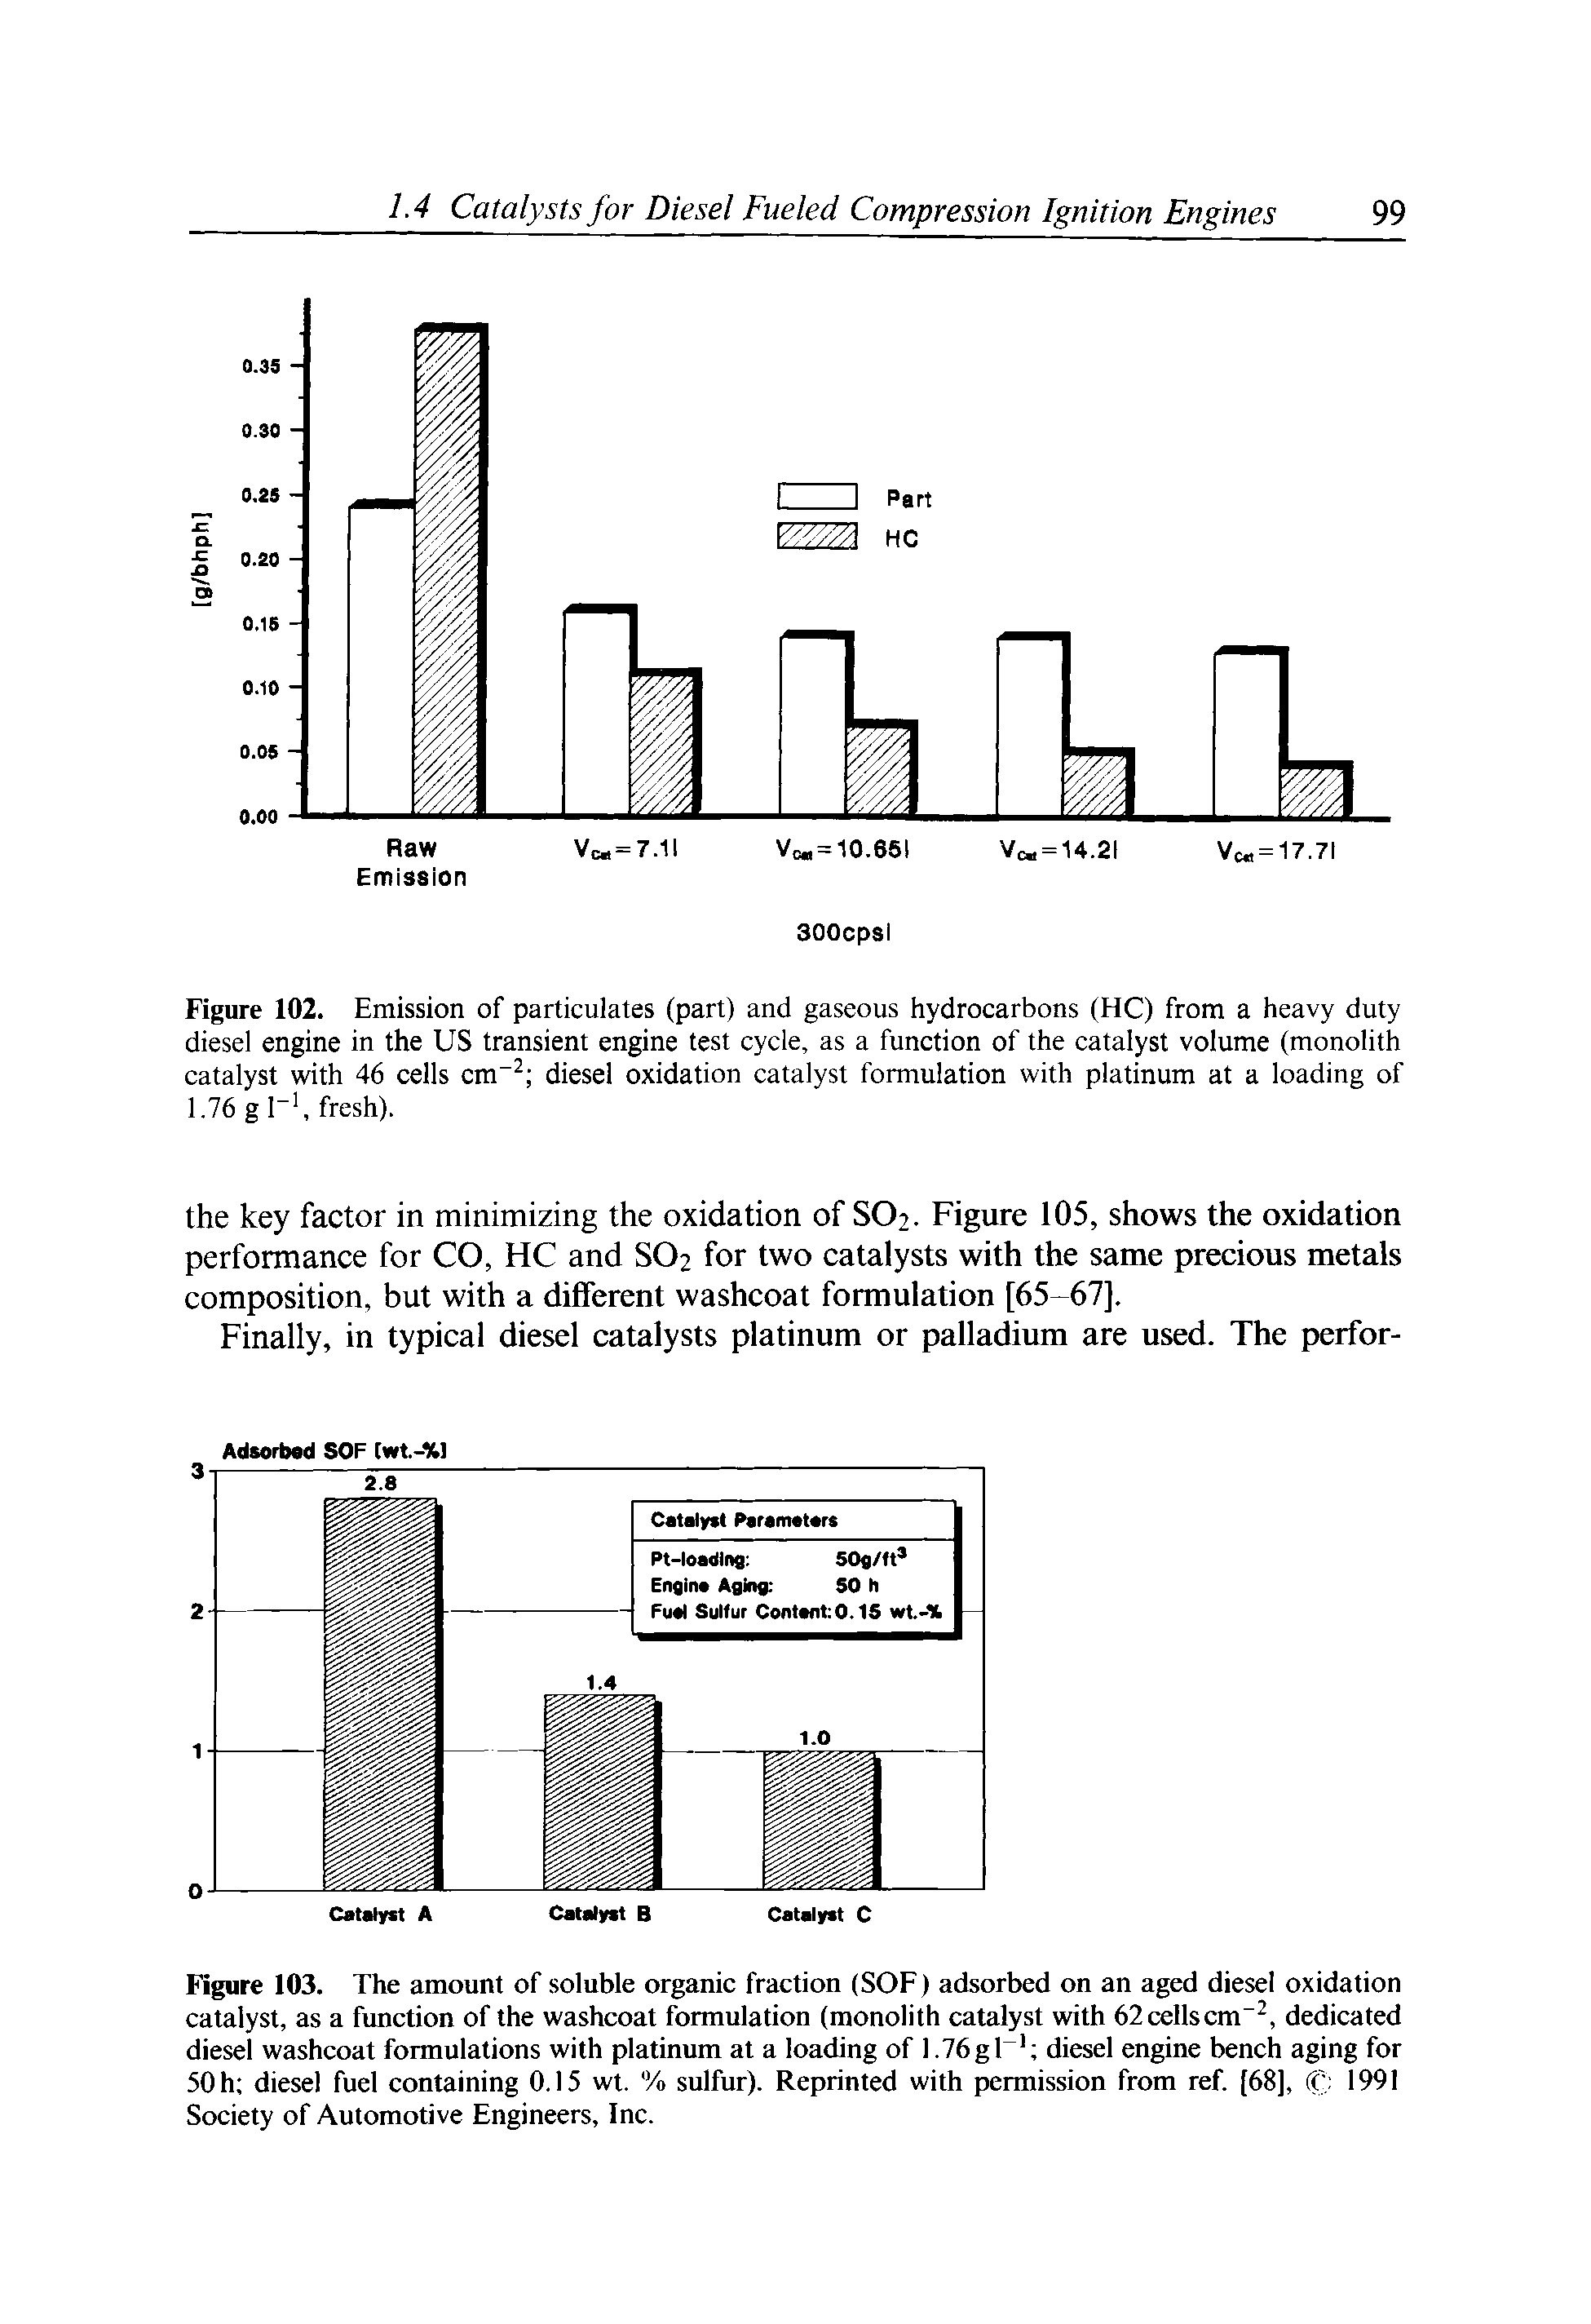 Figure 102. Emission of particulates (part) and gaseous hydrocarbons (HC) from a heavy duty diesel engine in the US transient engine test cycle, as a function of the catalyst volume (monolith catalyst with 46 cells cm" diesel oxidation catalyst formulation with platinum at a loading of 1.76 g 1 , fresh).